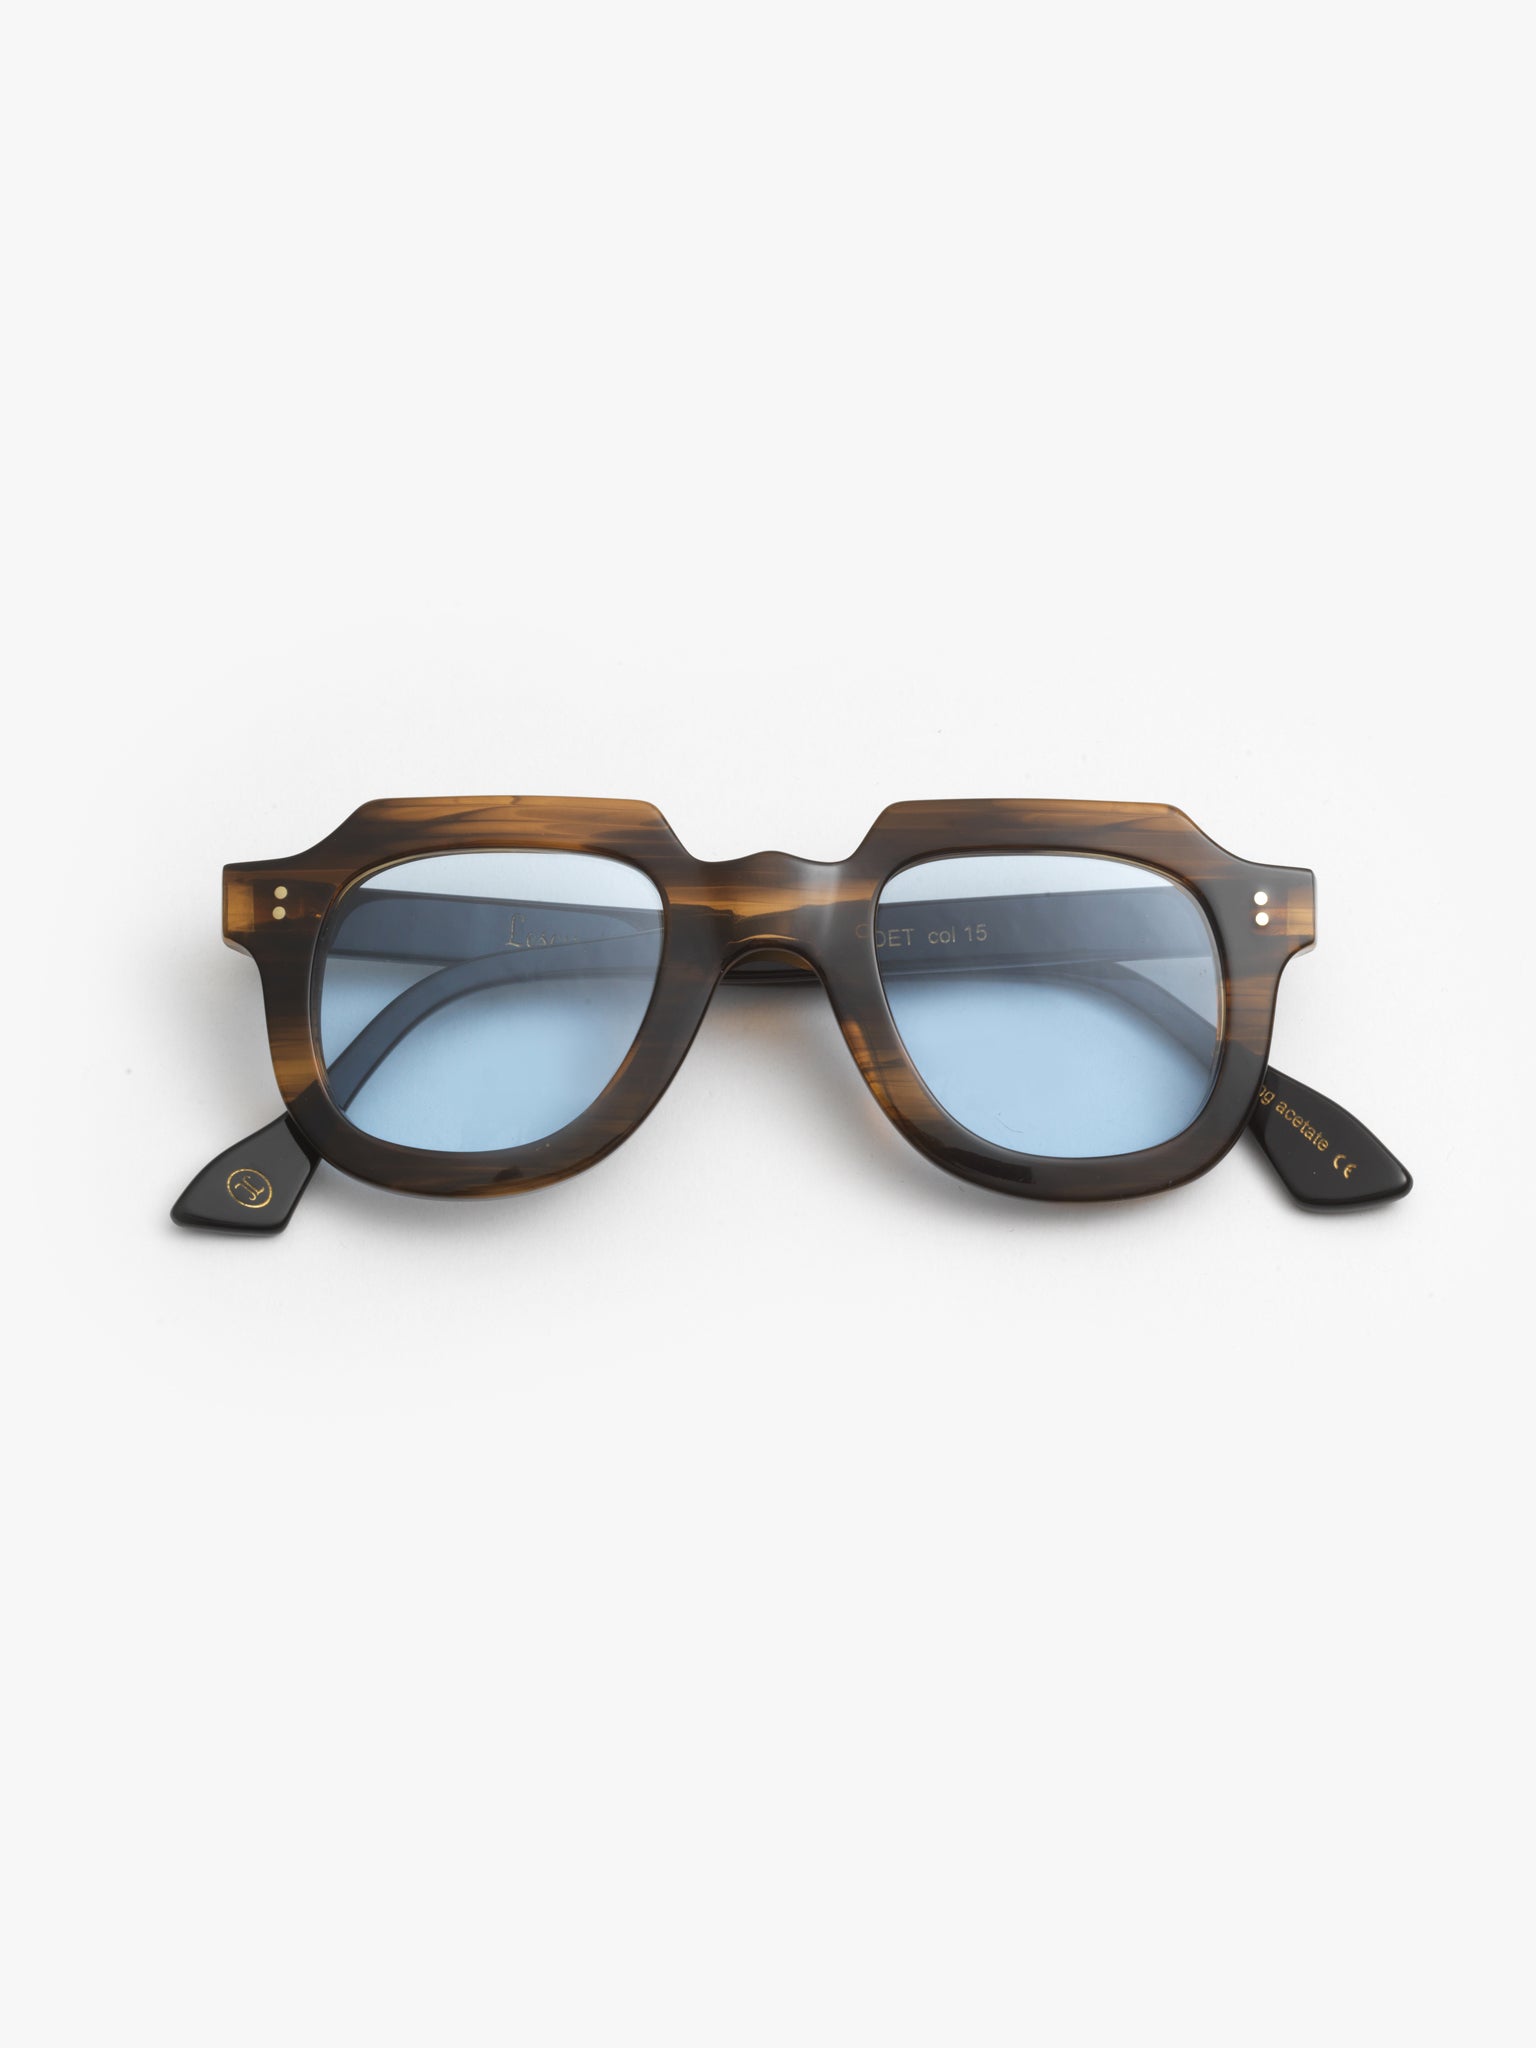 Lesca Lunetier Odet 6mm Sunglasses - Dark Horn Frame with Mineral Light Blue Lenses - Limited Edition Upcycled Collection